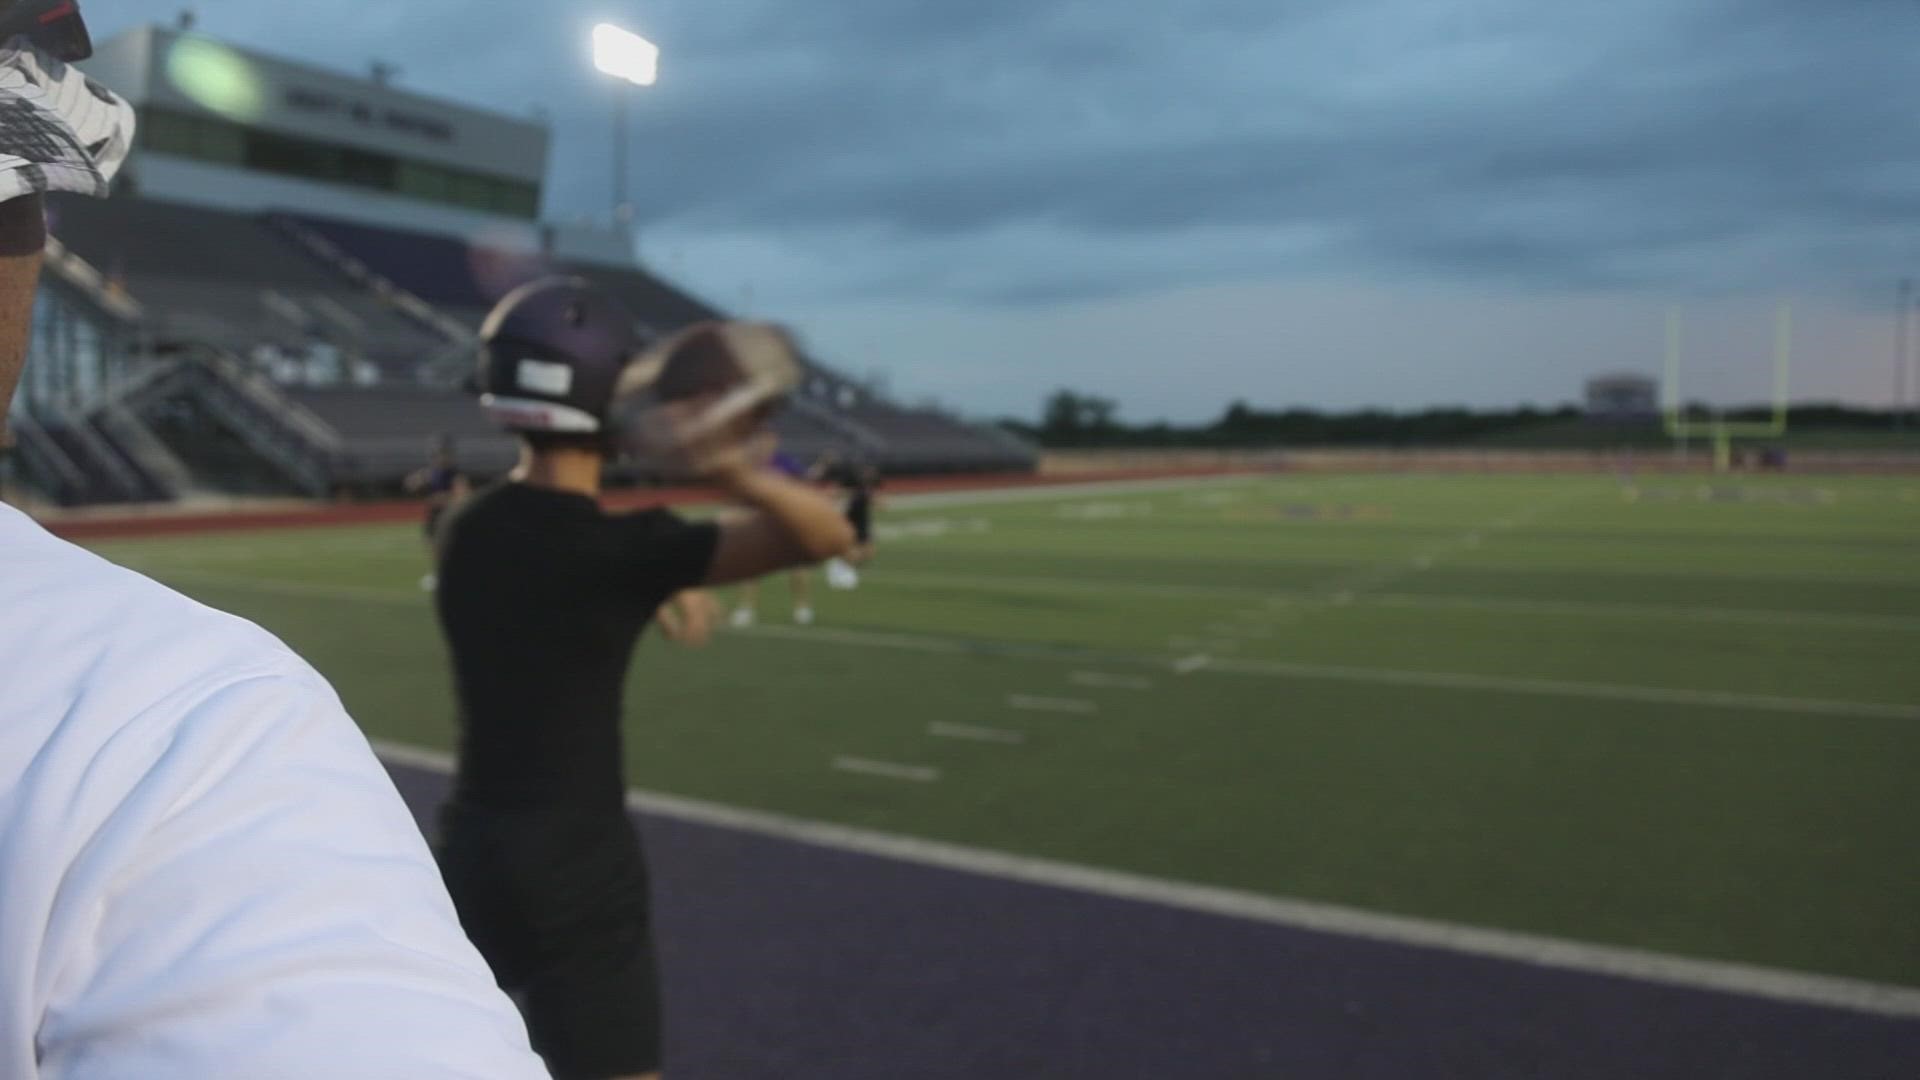 For the first week, KVUE visited Liberty Hill High School. Liberty Hill opens its 2021 season against Ellison High School.